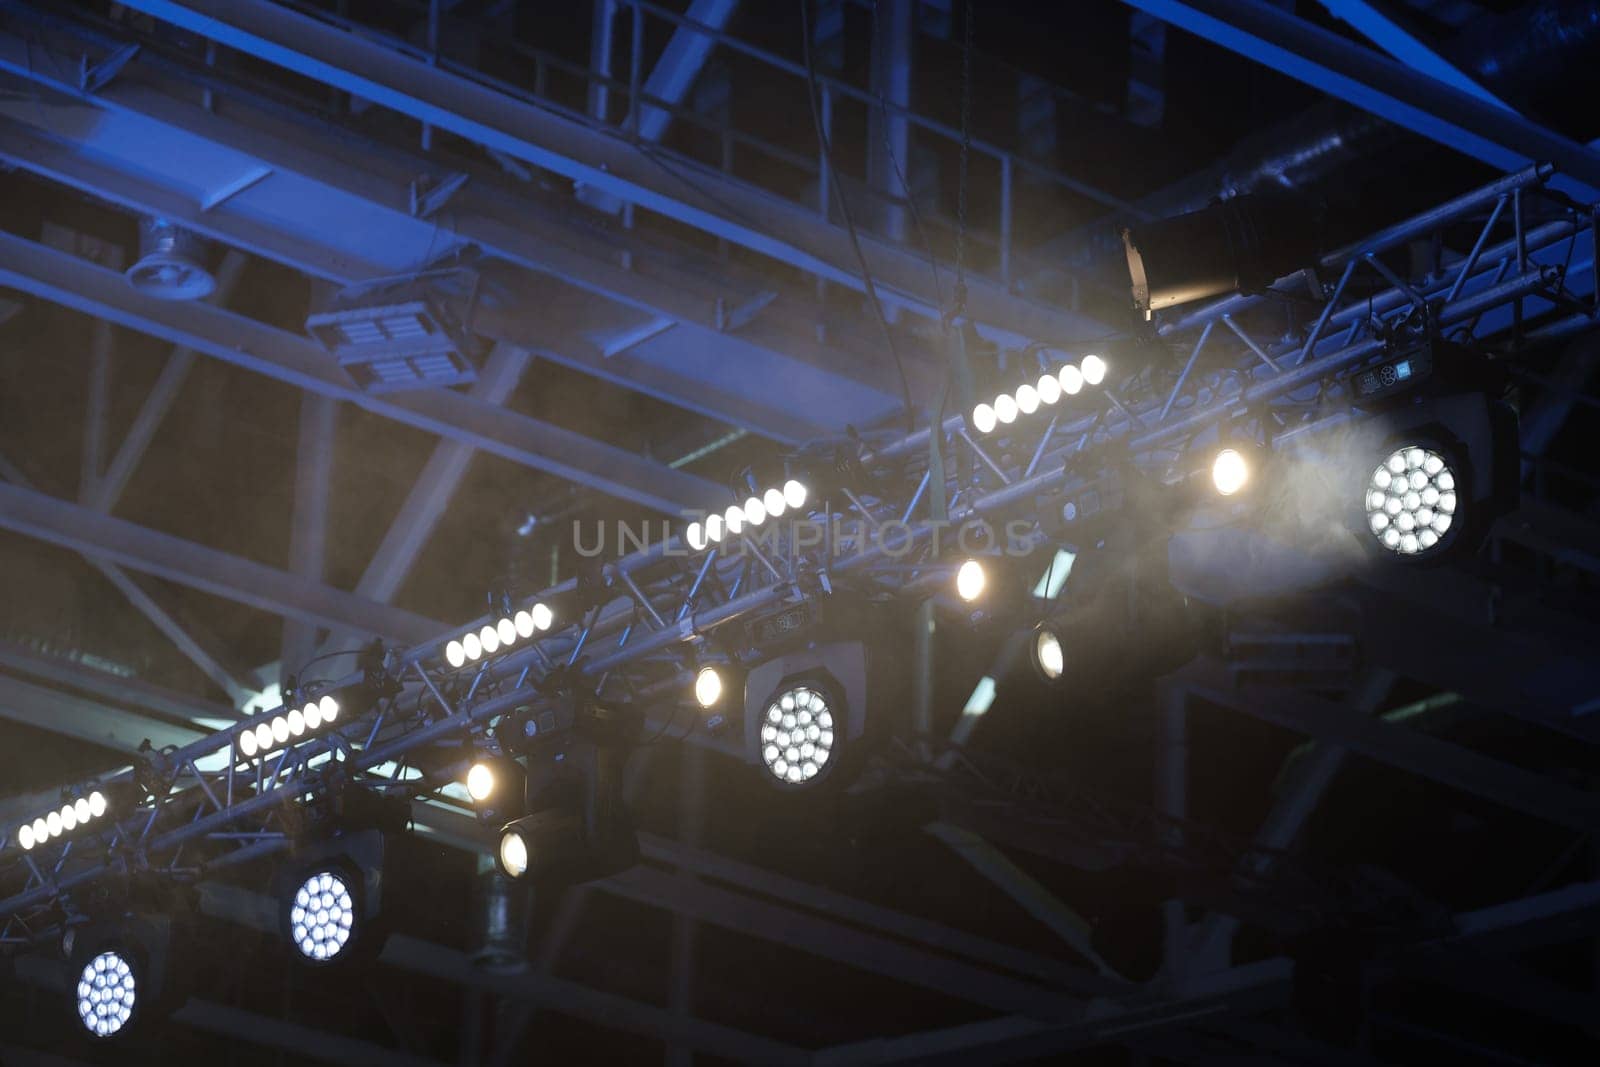 Stage lighting equipment indoor stage. Entertainment concert lighting. Led lighting devices under roof.